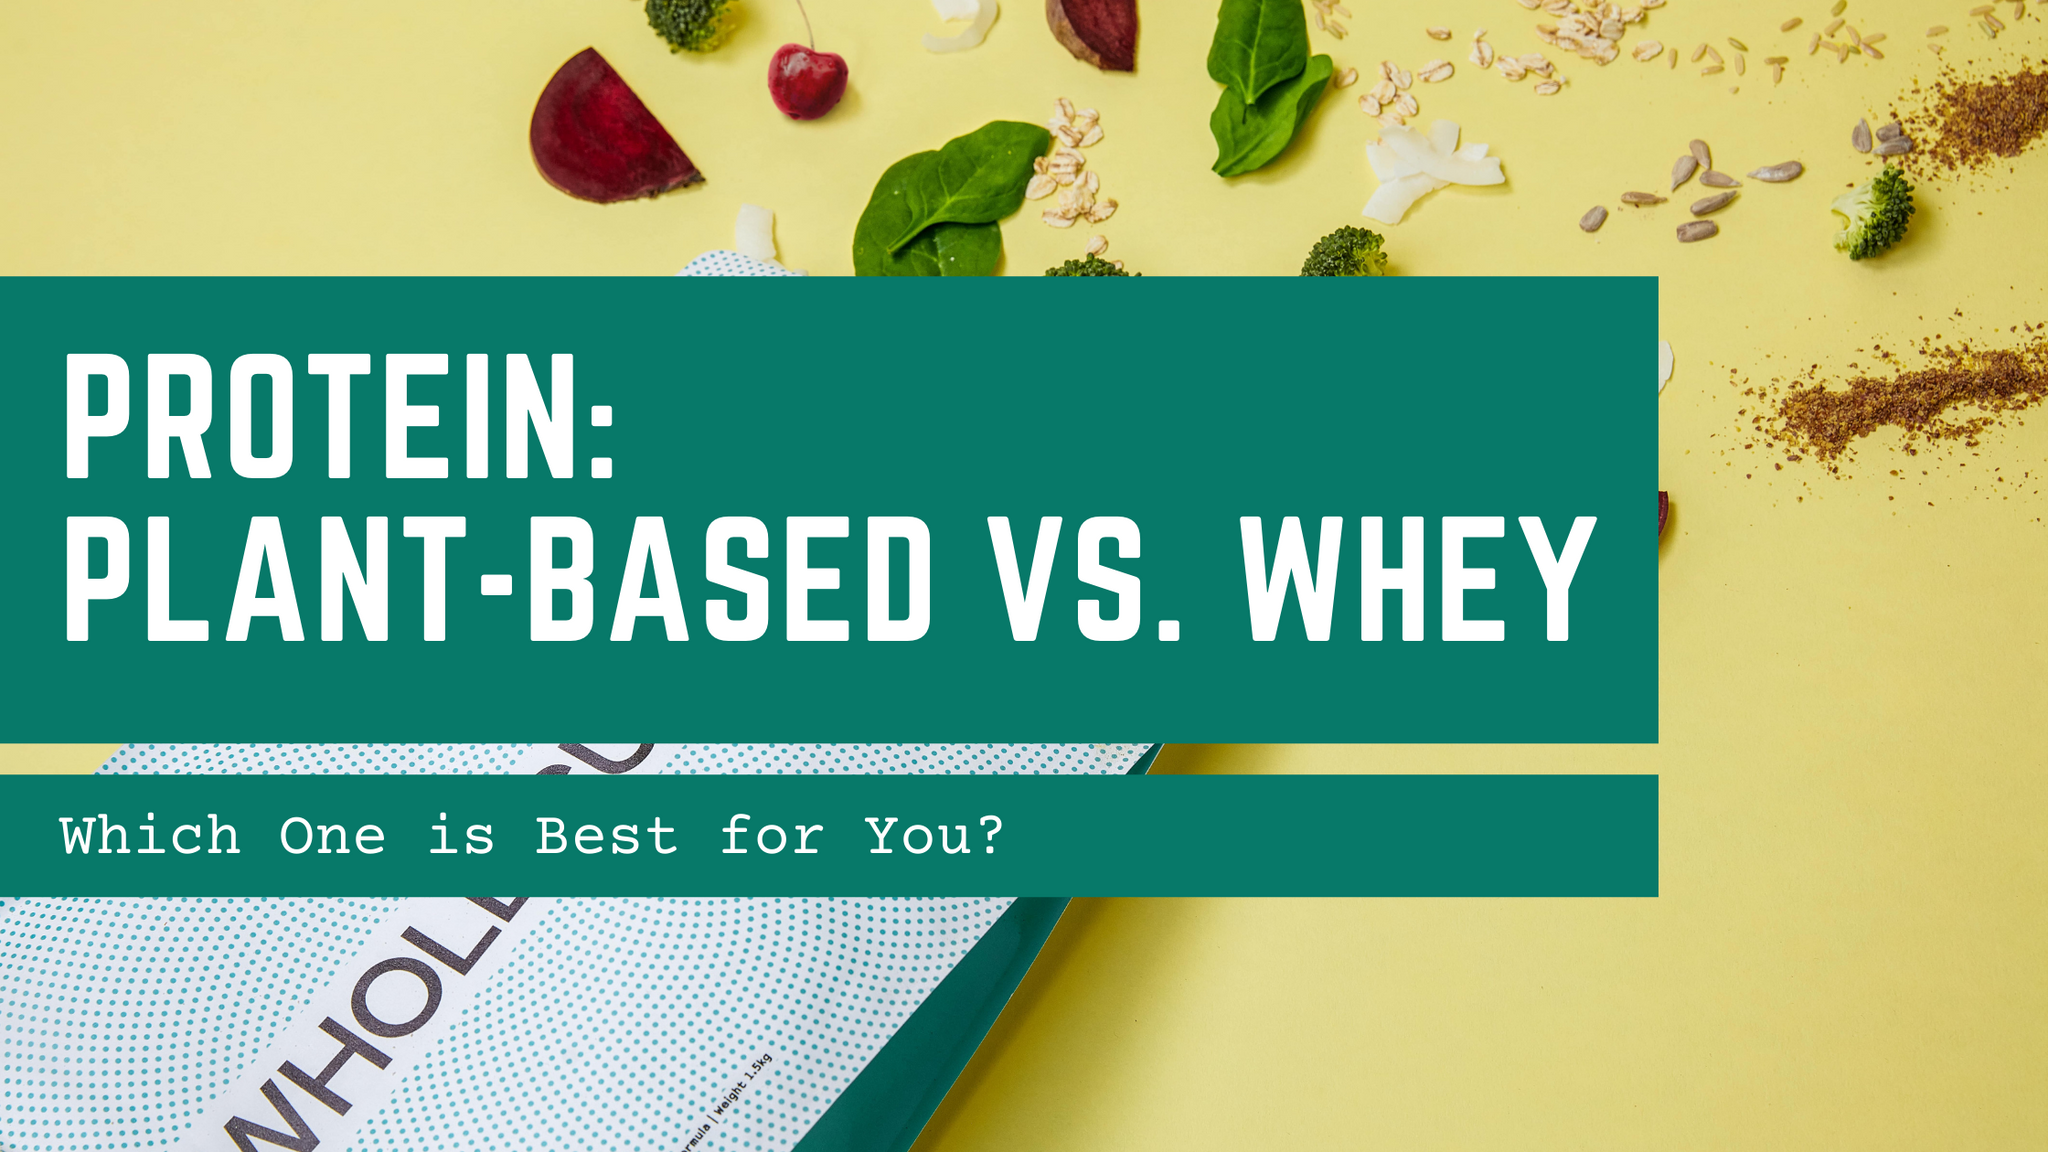 Protein: Plant-Based vs. Whey: Which One is Best for You?